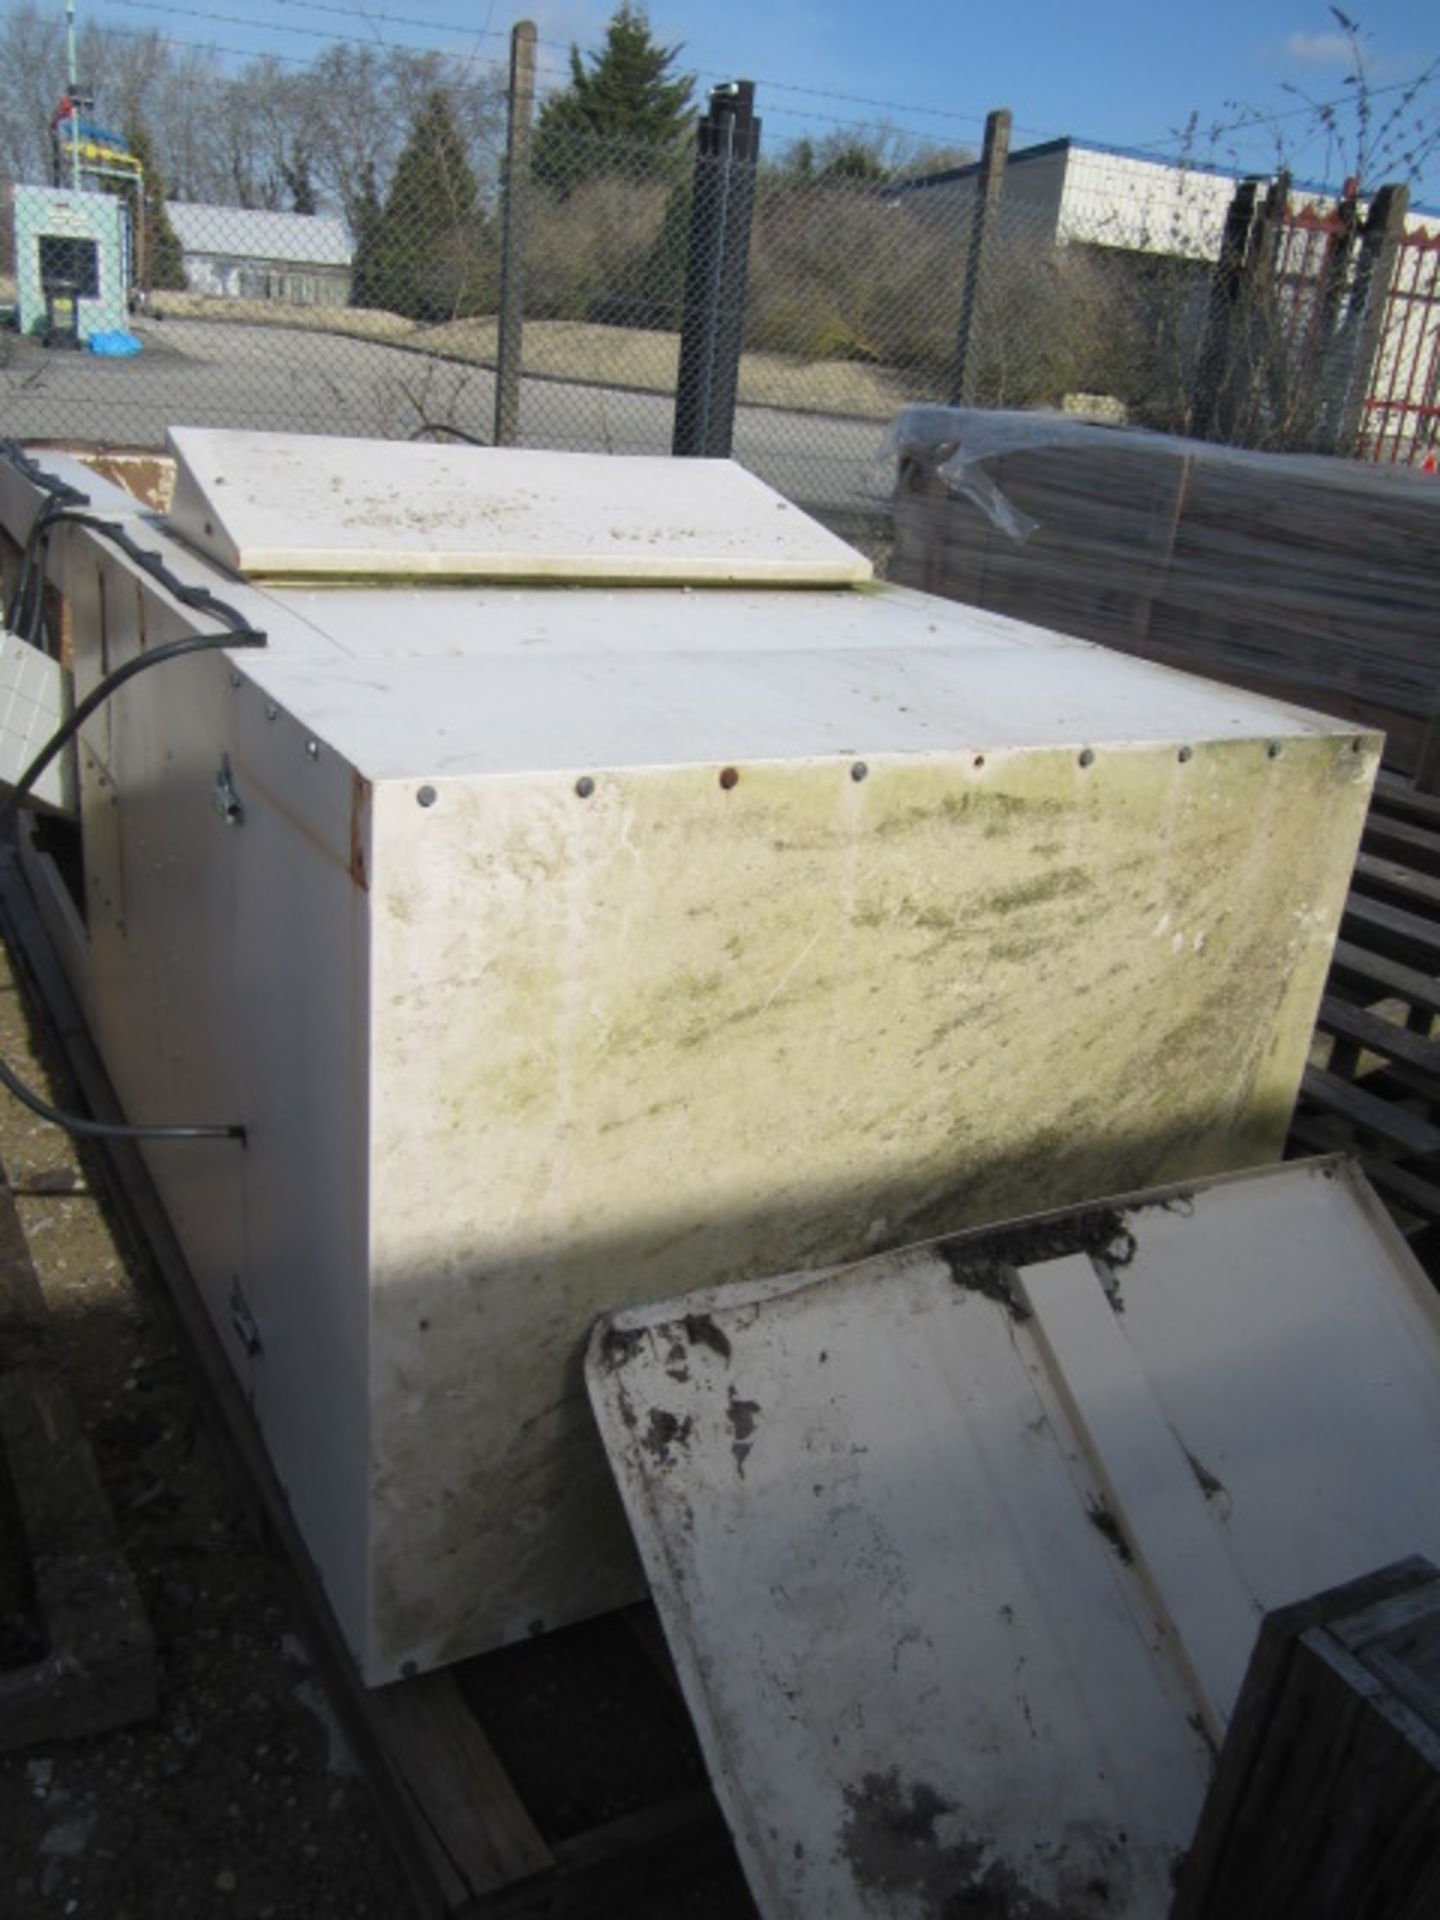 Air Plants twang bag dust extraction unit, type CEF2, serial number CEF257 (2004) - For spares or - Image 2 of 3